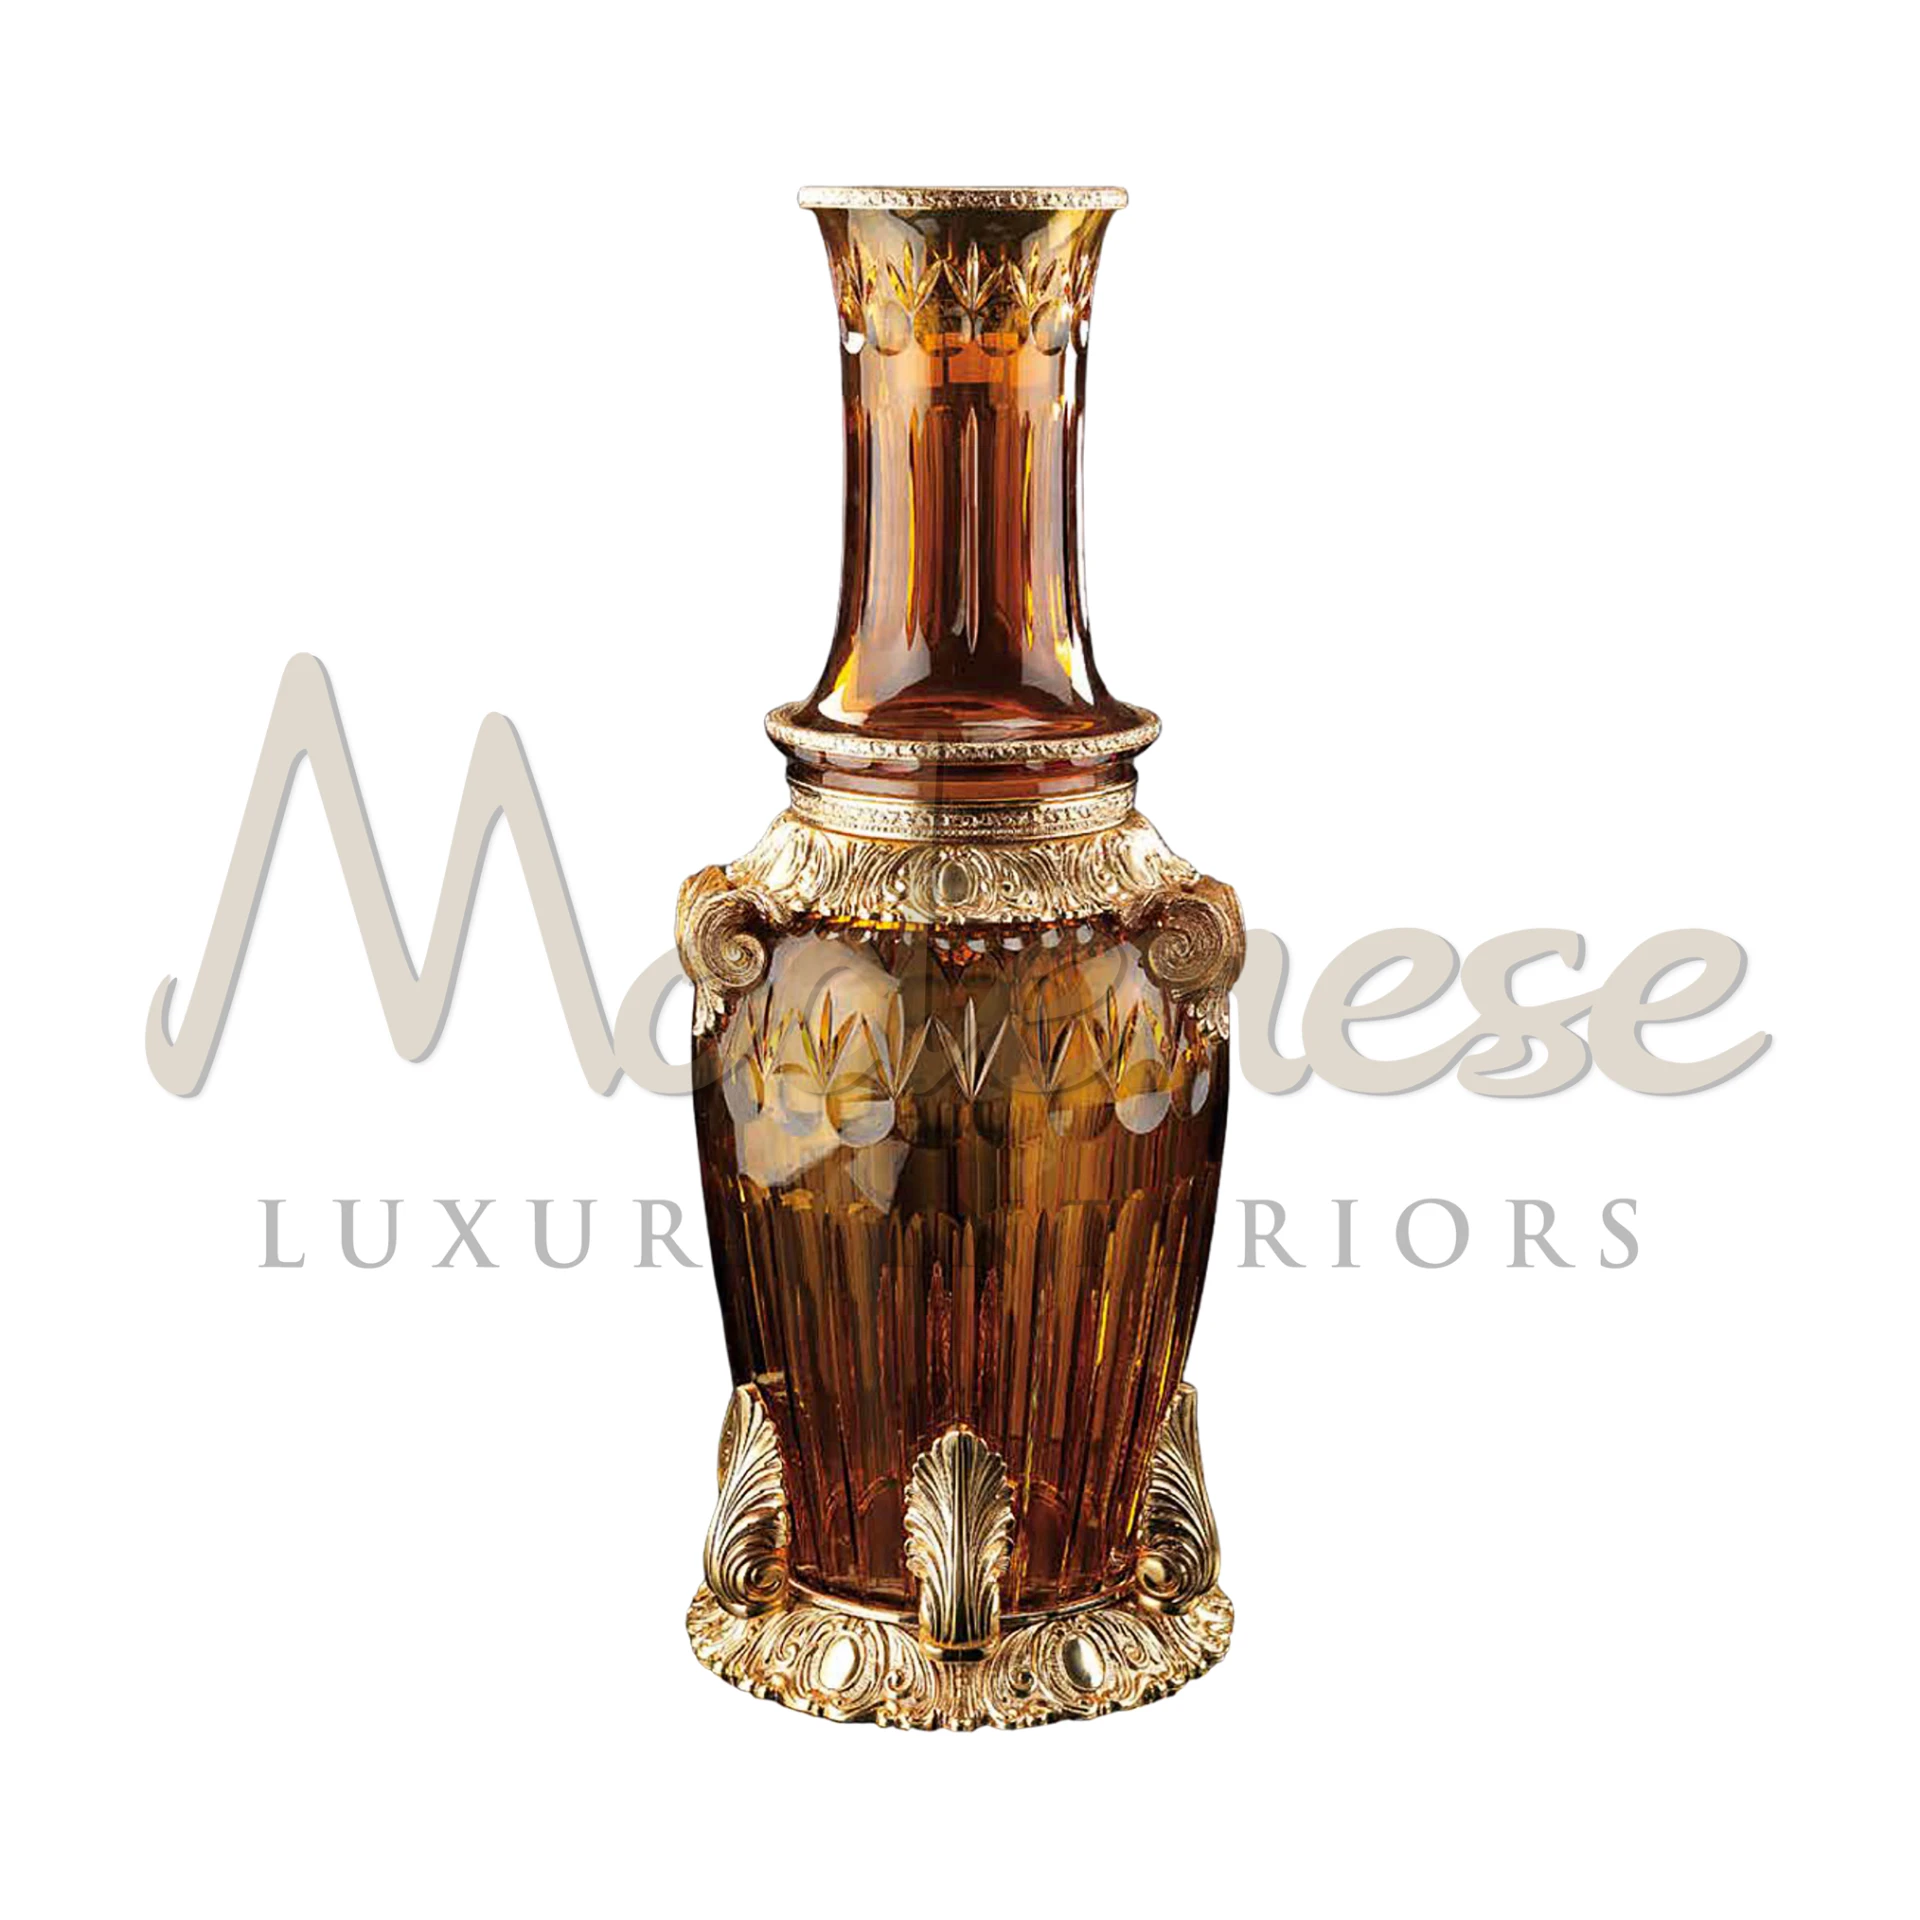 Refined Elegant Italian Vase, showcasing intricate patterns and high-quality craftsmanship, perfect for luxury and classic interior design.